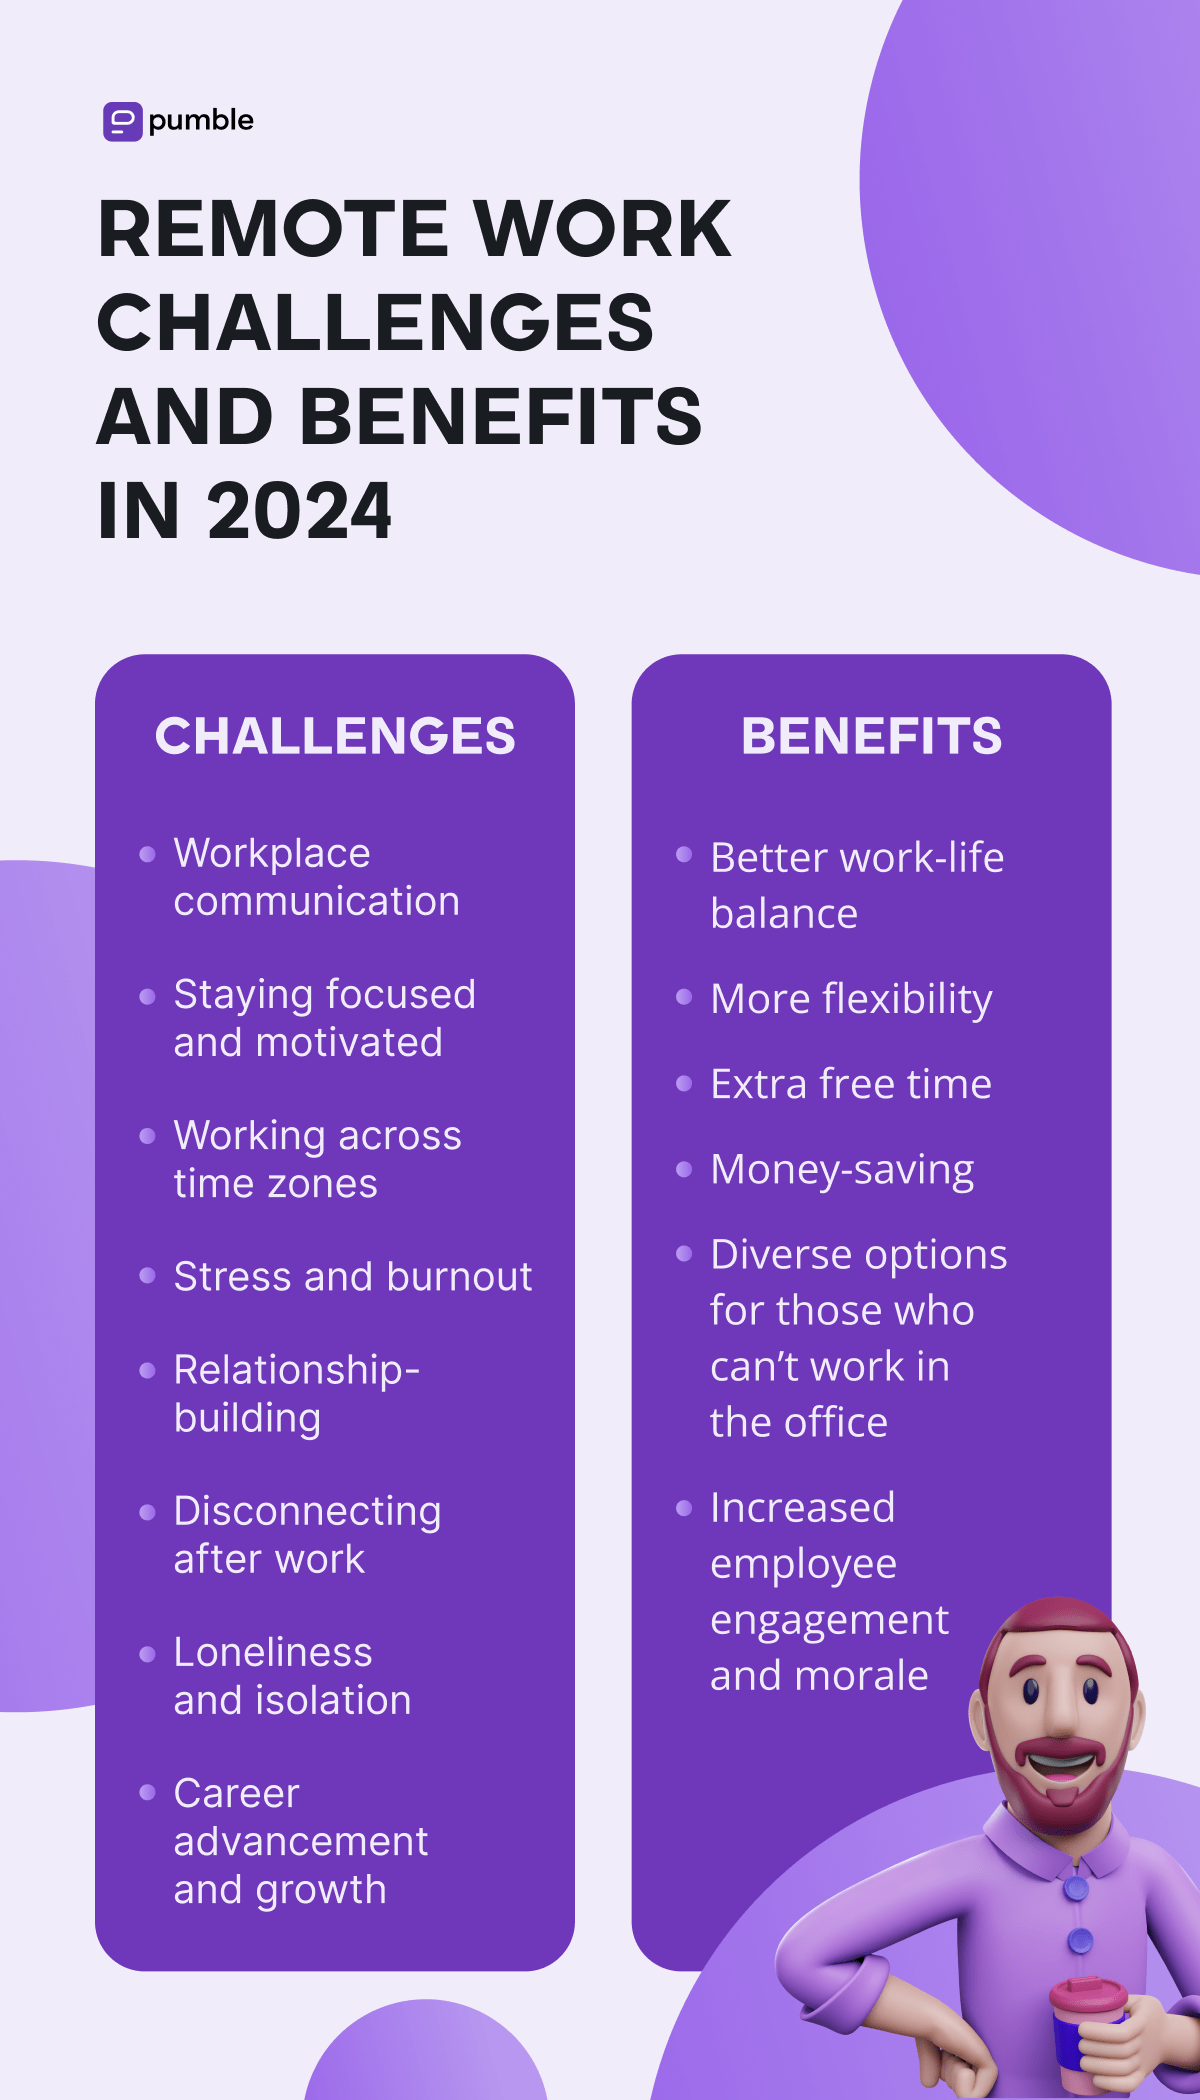 Remote work: Challenges and benefits in 2024
